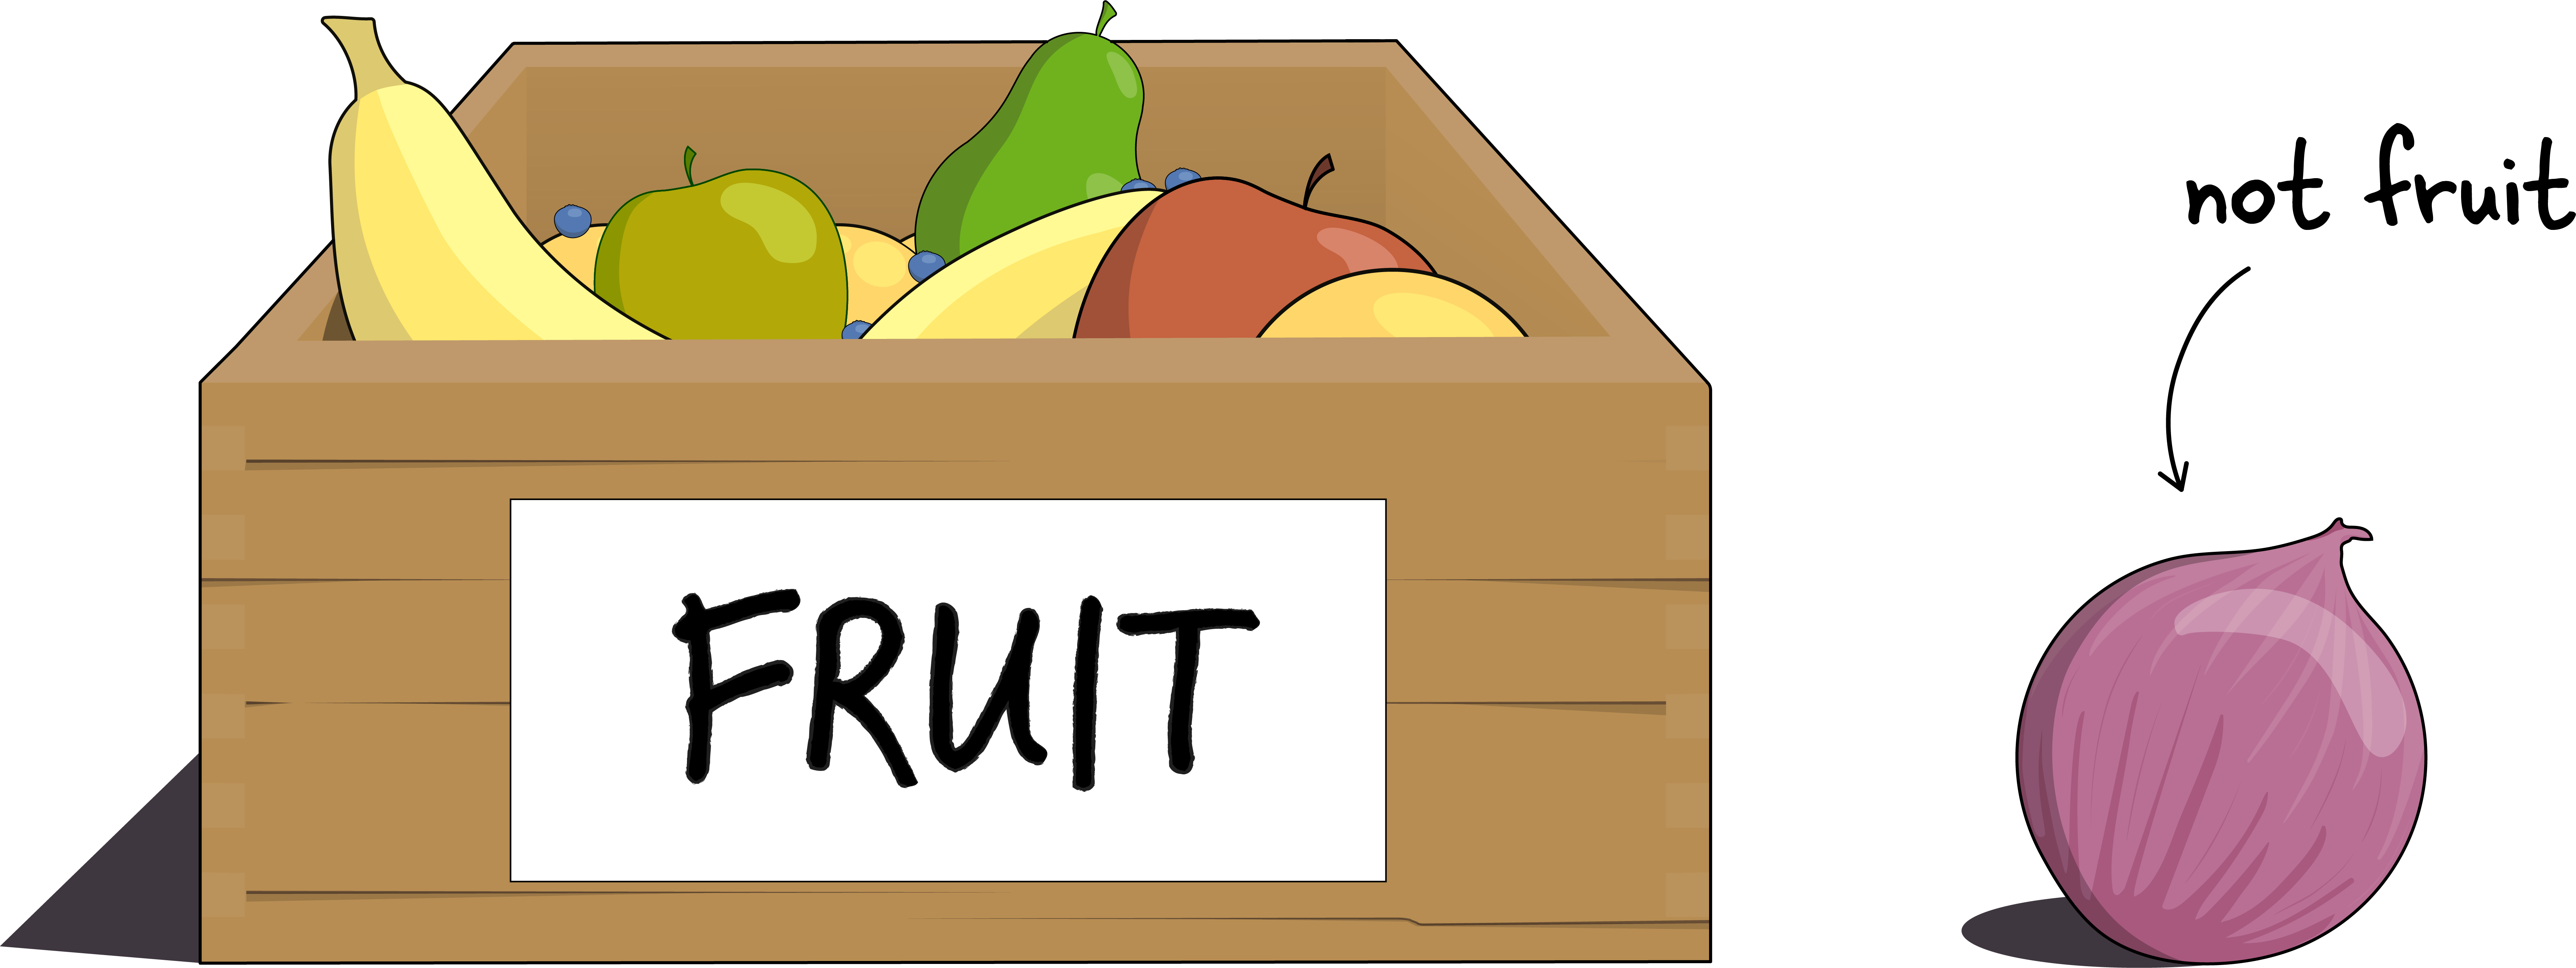 A box labeled "Fruit" containing many fruits, alongside an onion labeled as "not fruit!"